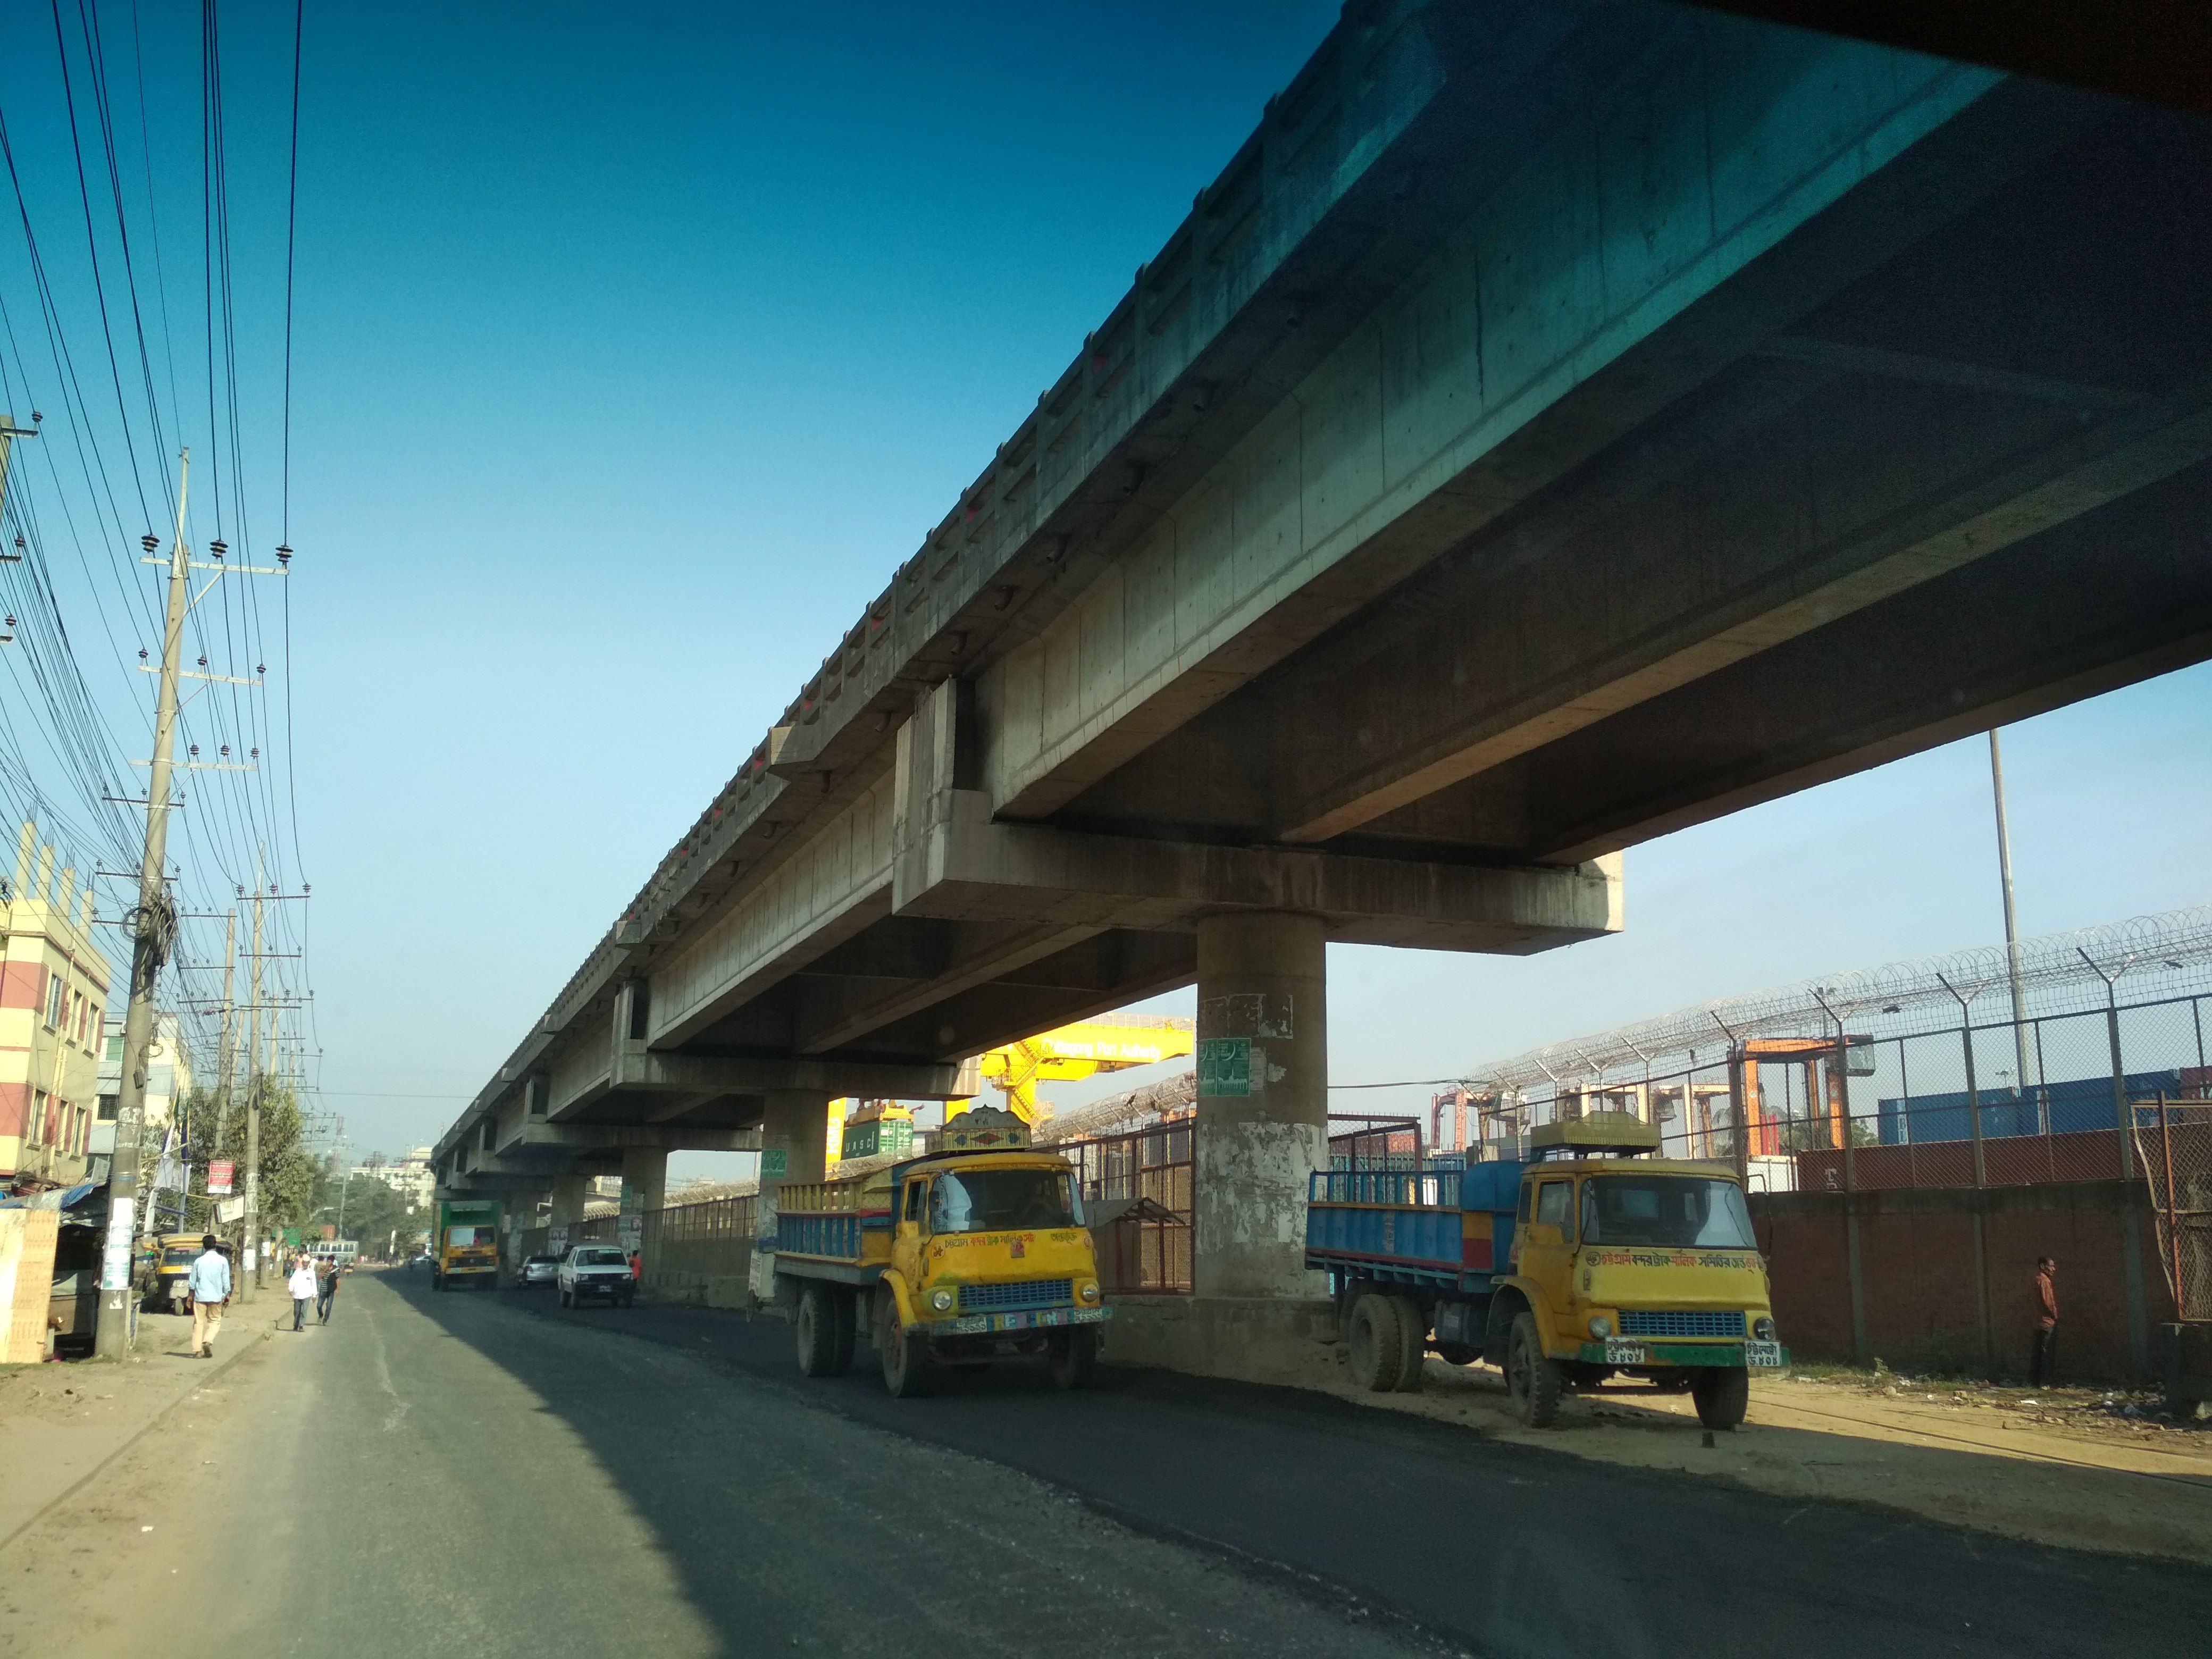 Port link road fly over connecting  Chittagong container terminal to Port link road. All container carrier, Covered van abd trucks entering and leaving uses/follows this fly over. This fly over reduced traffic on M A Aziz road by which general transports are running..